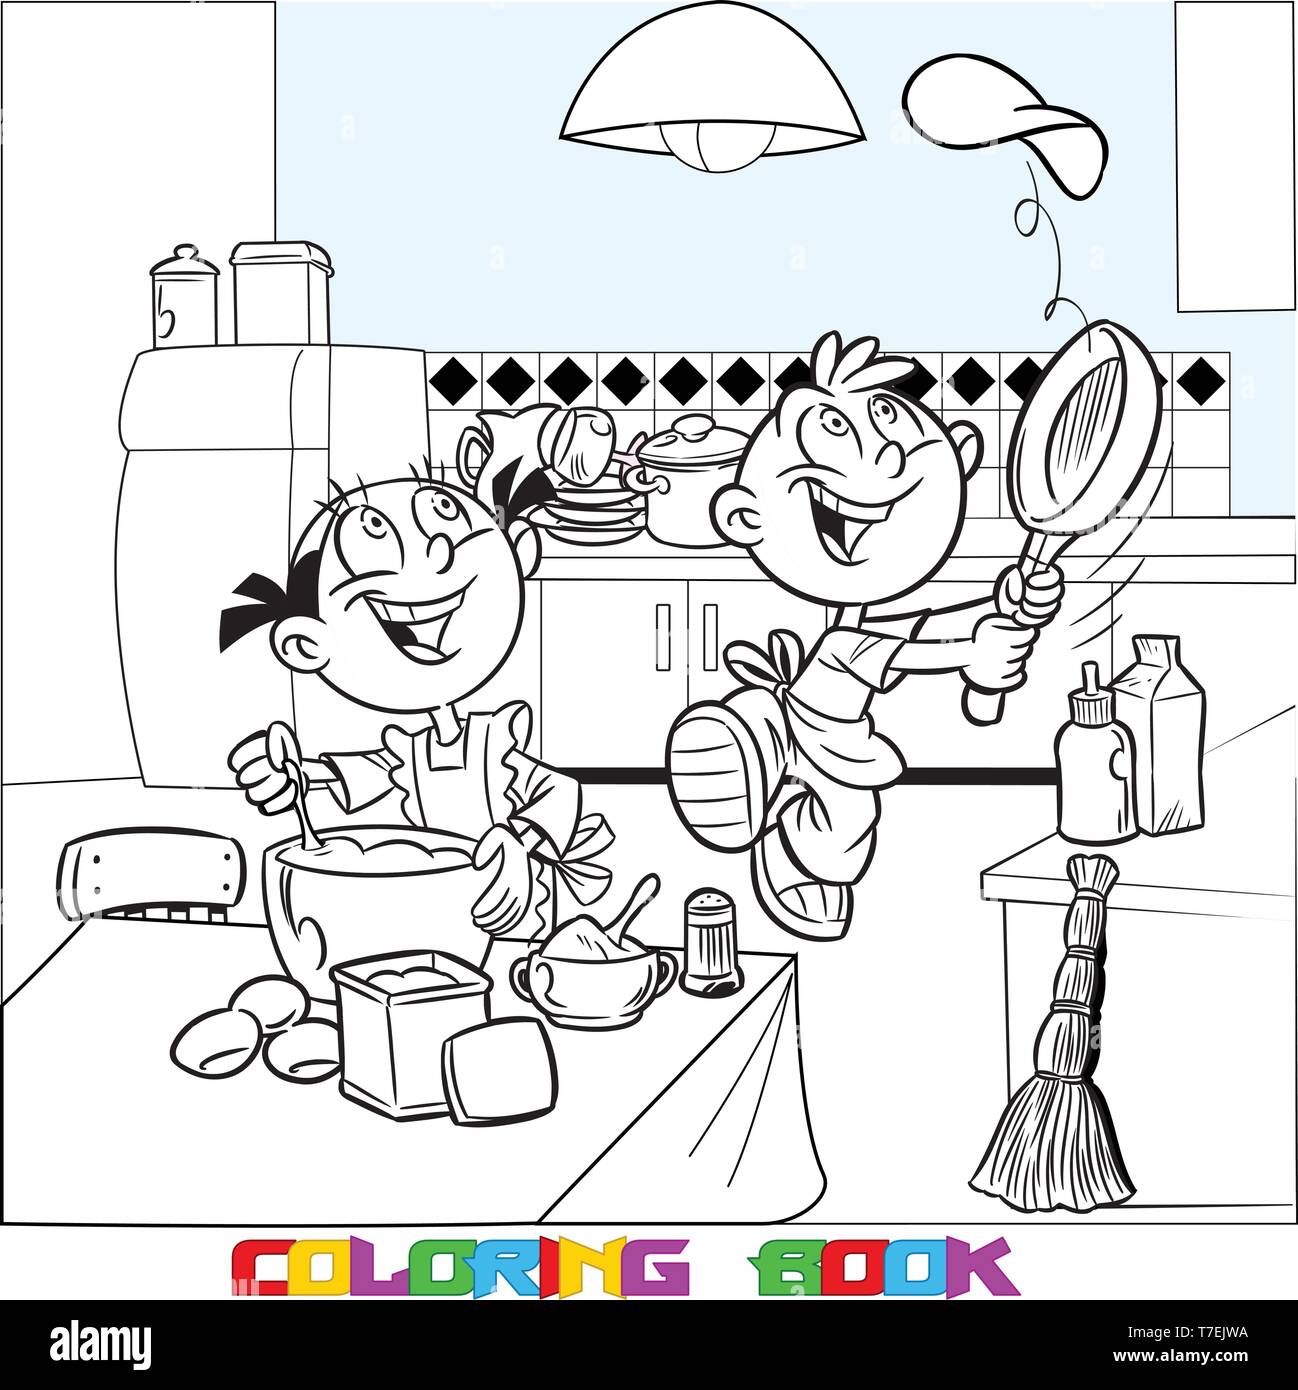 In vector illustration, cartoon girl and boy prepare food in the kitchen. Fun kids bake pancakes.  Is made a black outline for a coloring book. Stock Vector